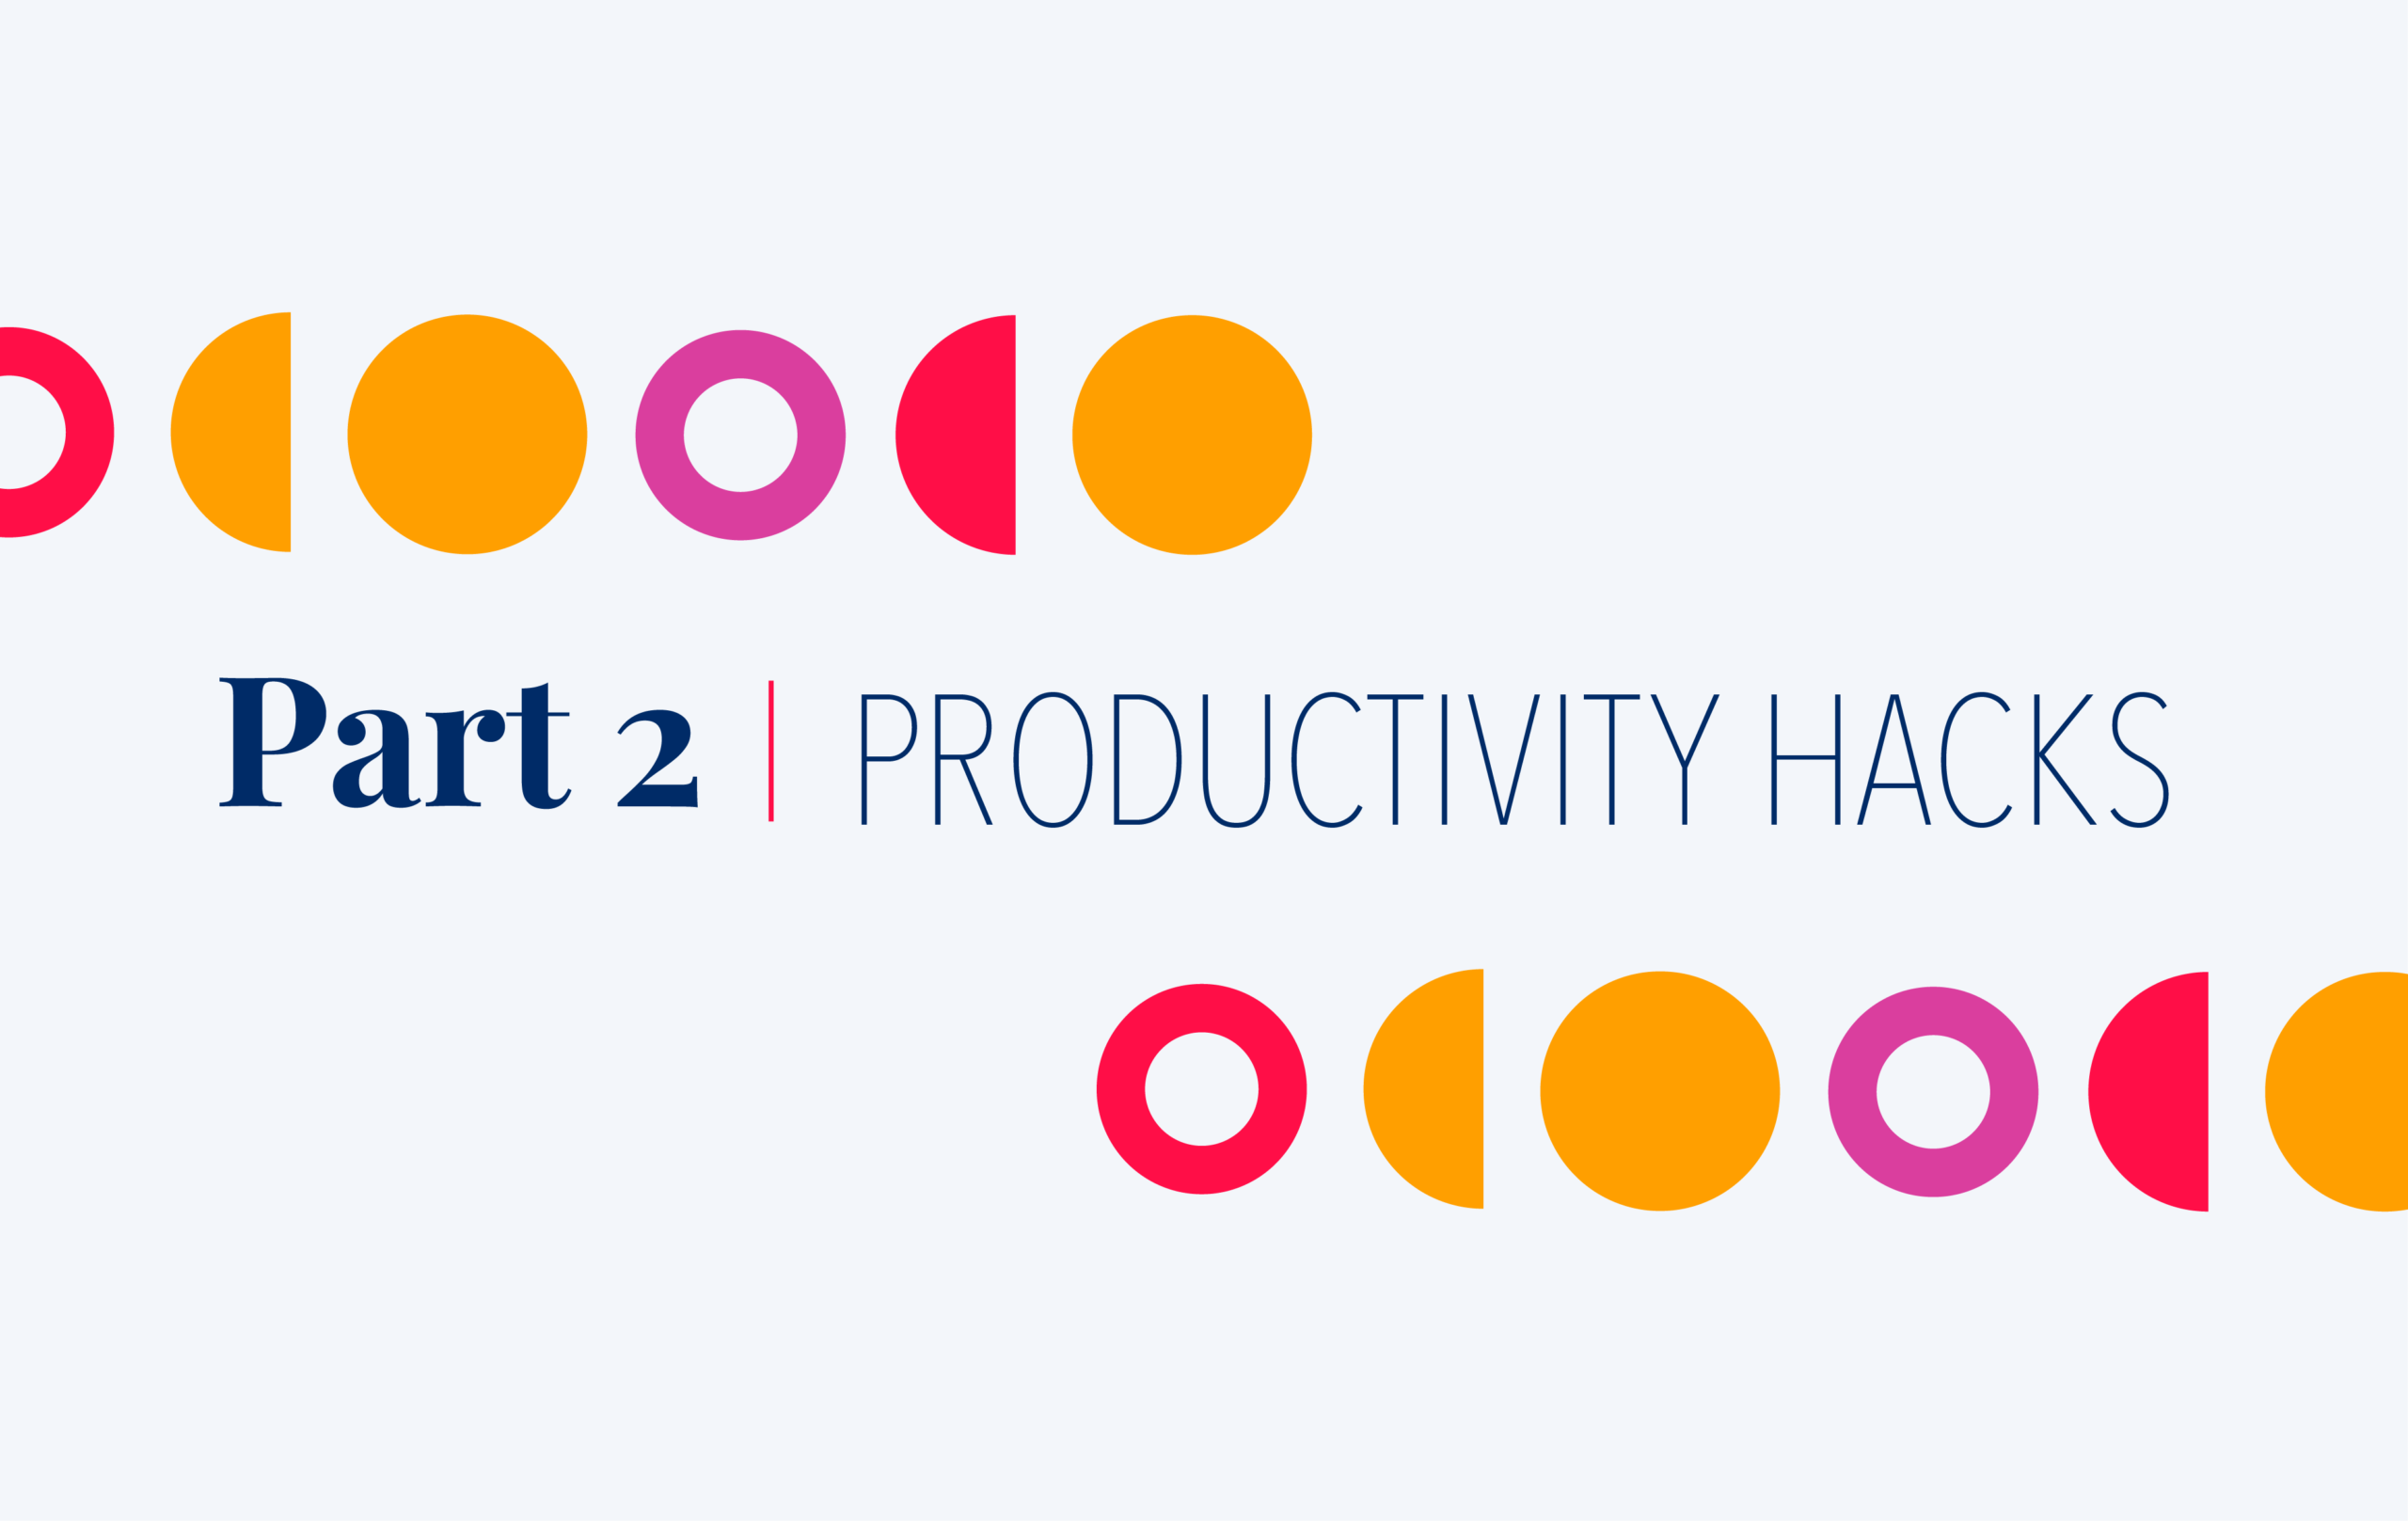 Part 2 of Productivity Hacks: 7 Ways to Minimize Distractions and Control Your Calendar